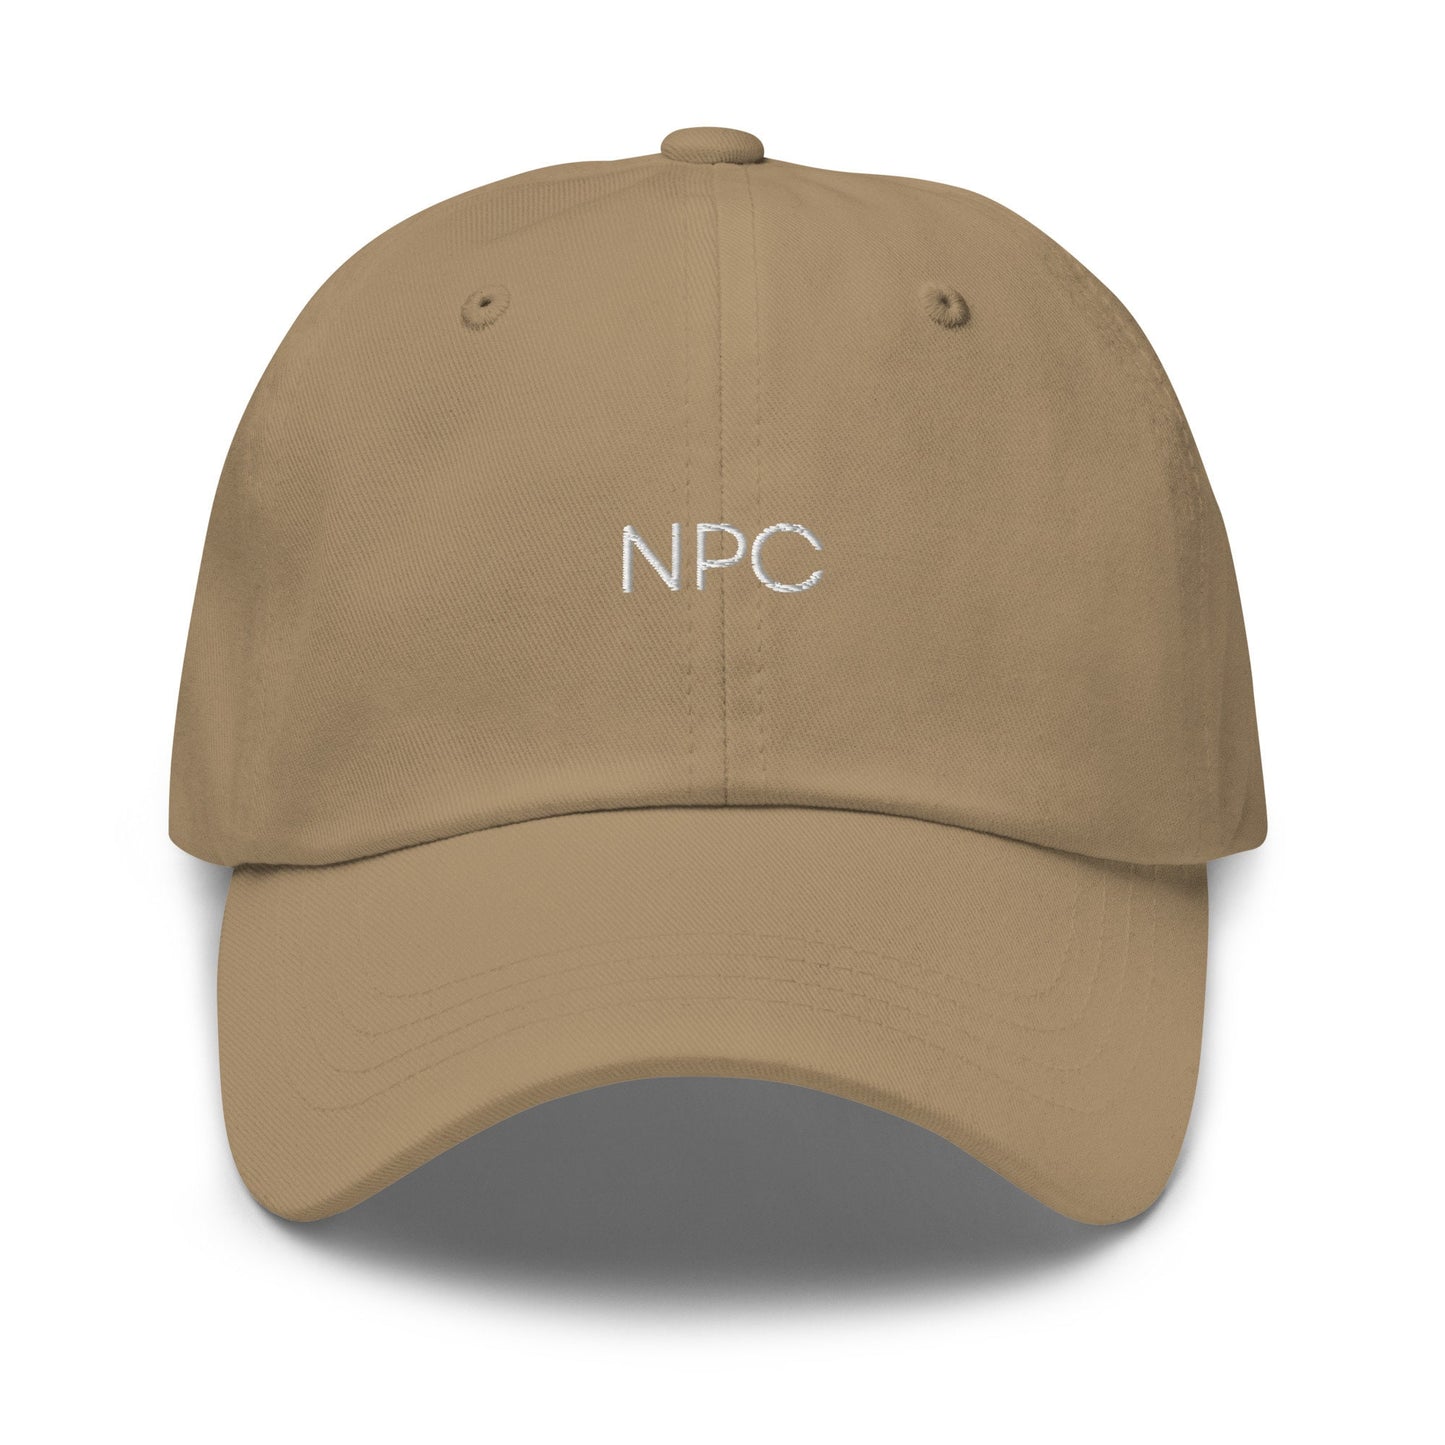 NPC Hat - Life is a Simulation - Non-player Character - Cotton Embroidered Cap